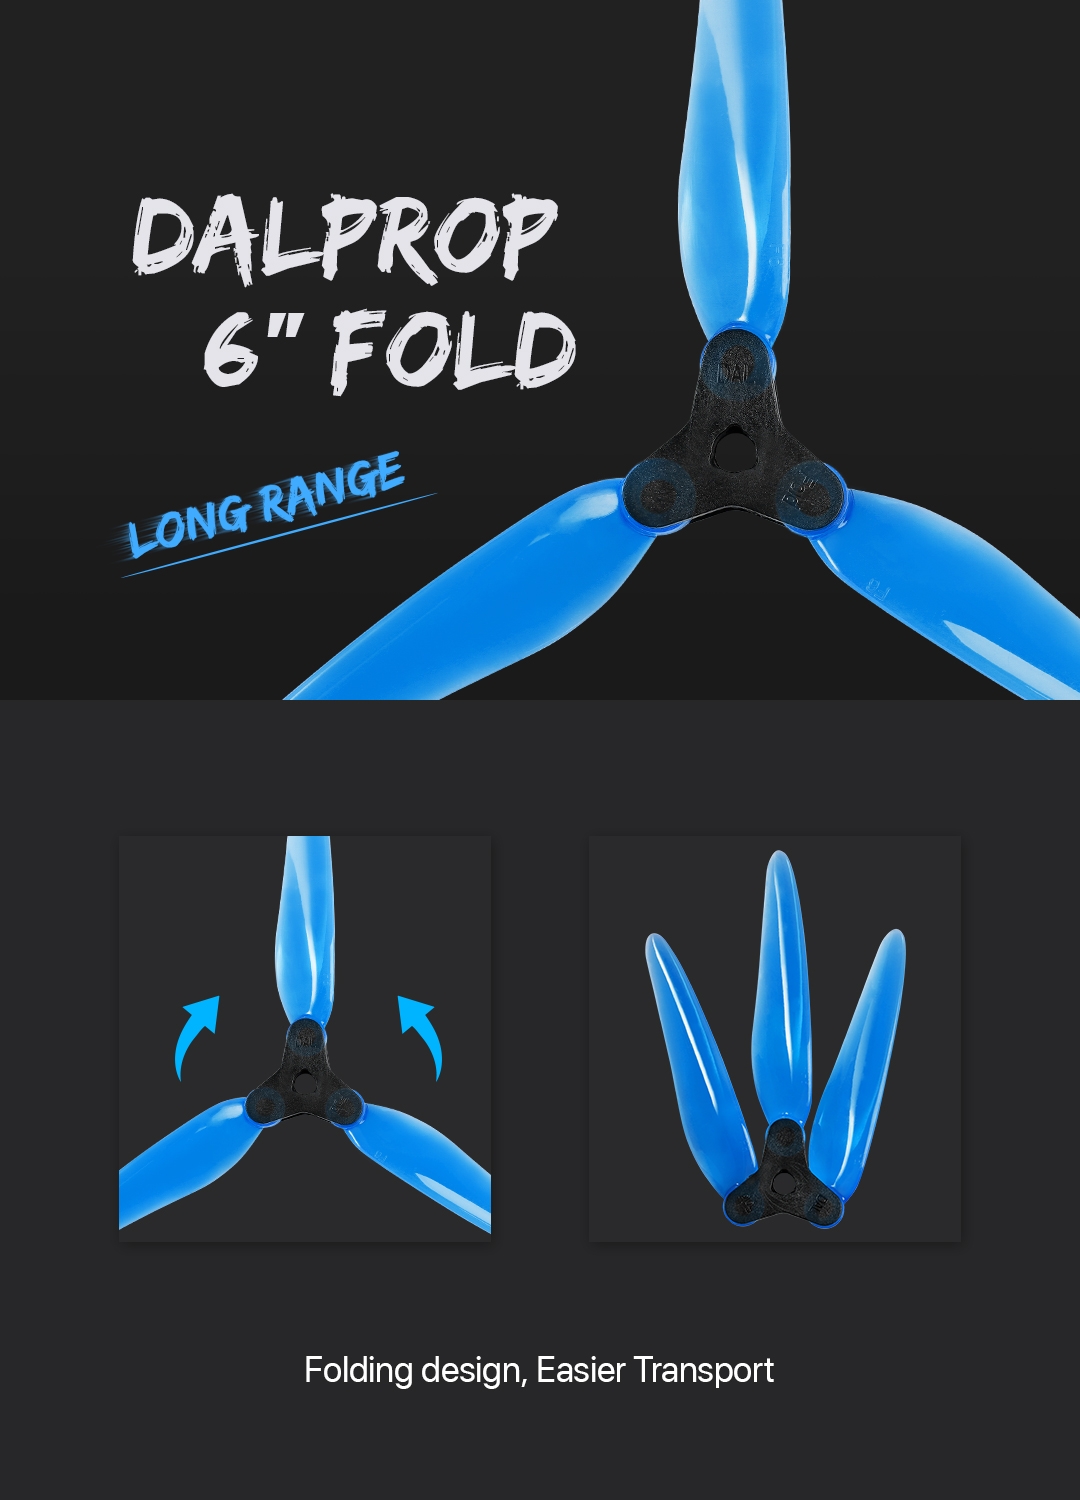 Dalprop Fold F6 6" Folding Propeller DIY Smooth Props Long Range Compatible POPO for FPV Racing RC Drone - Photo: 1